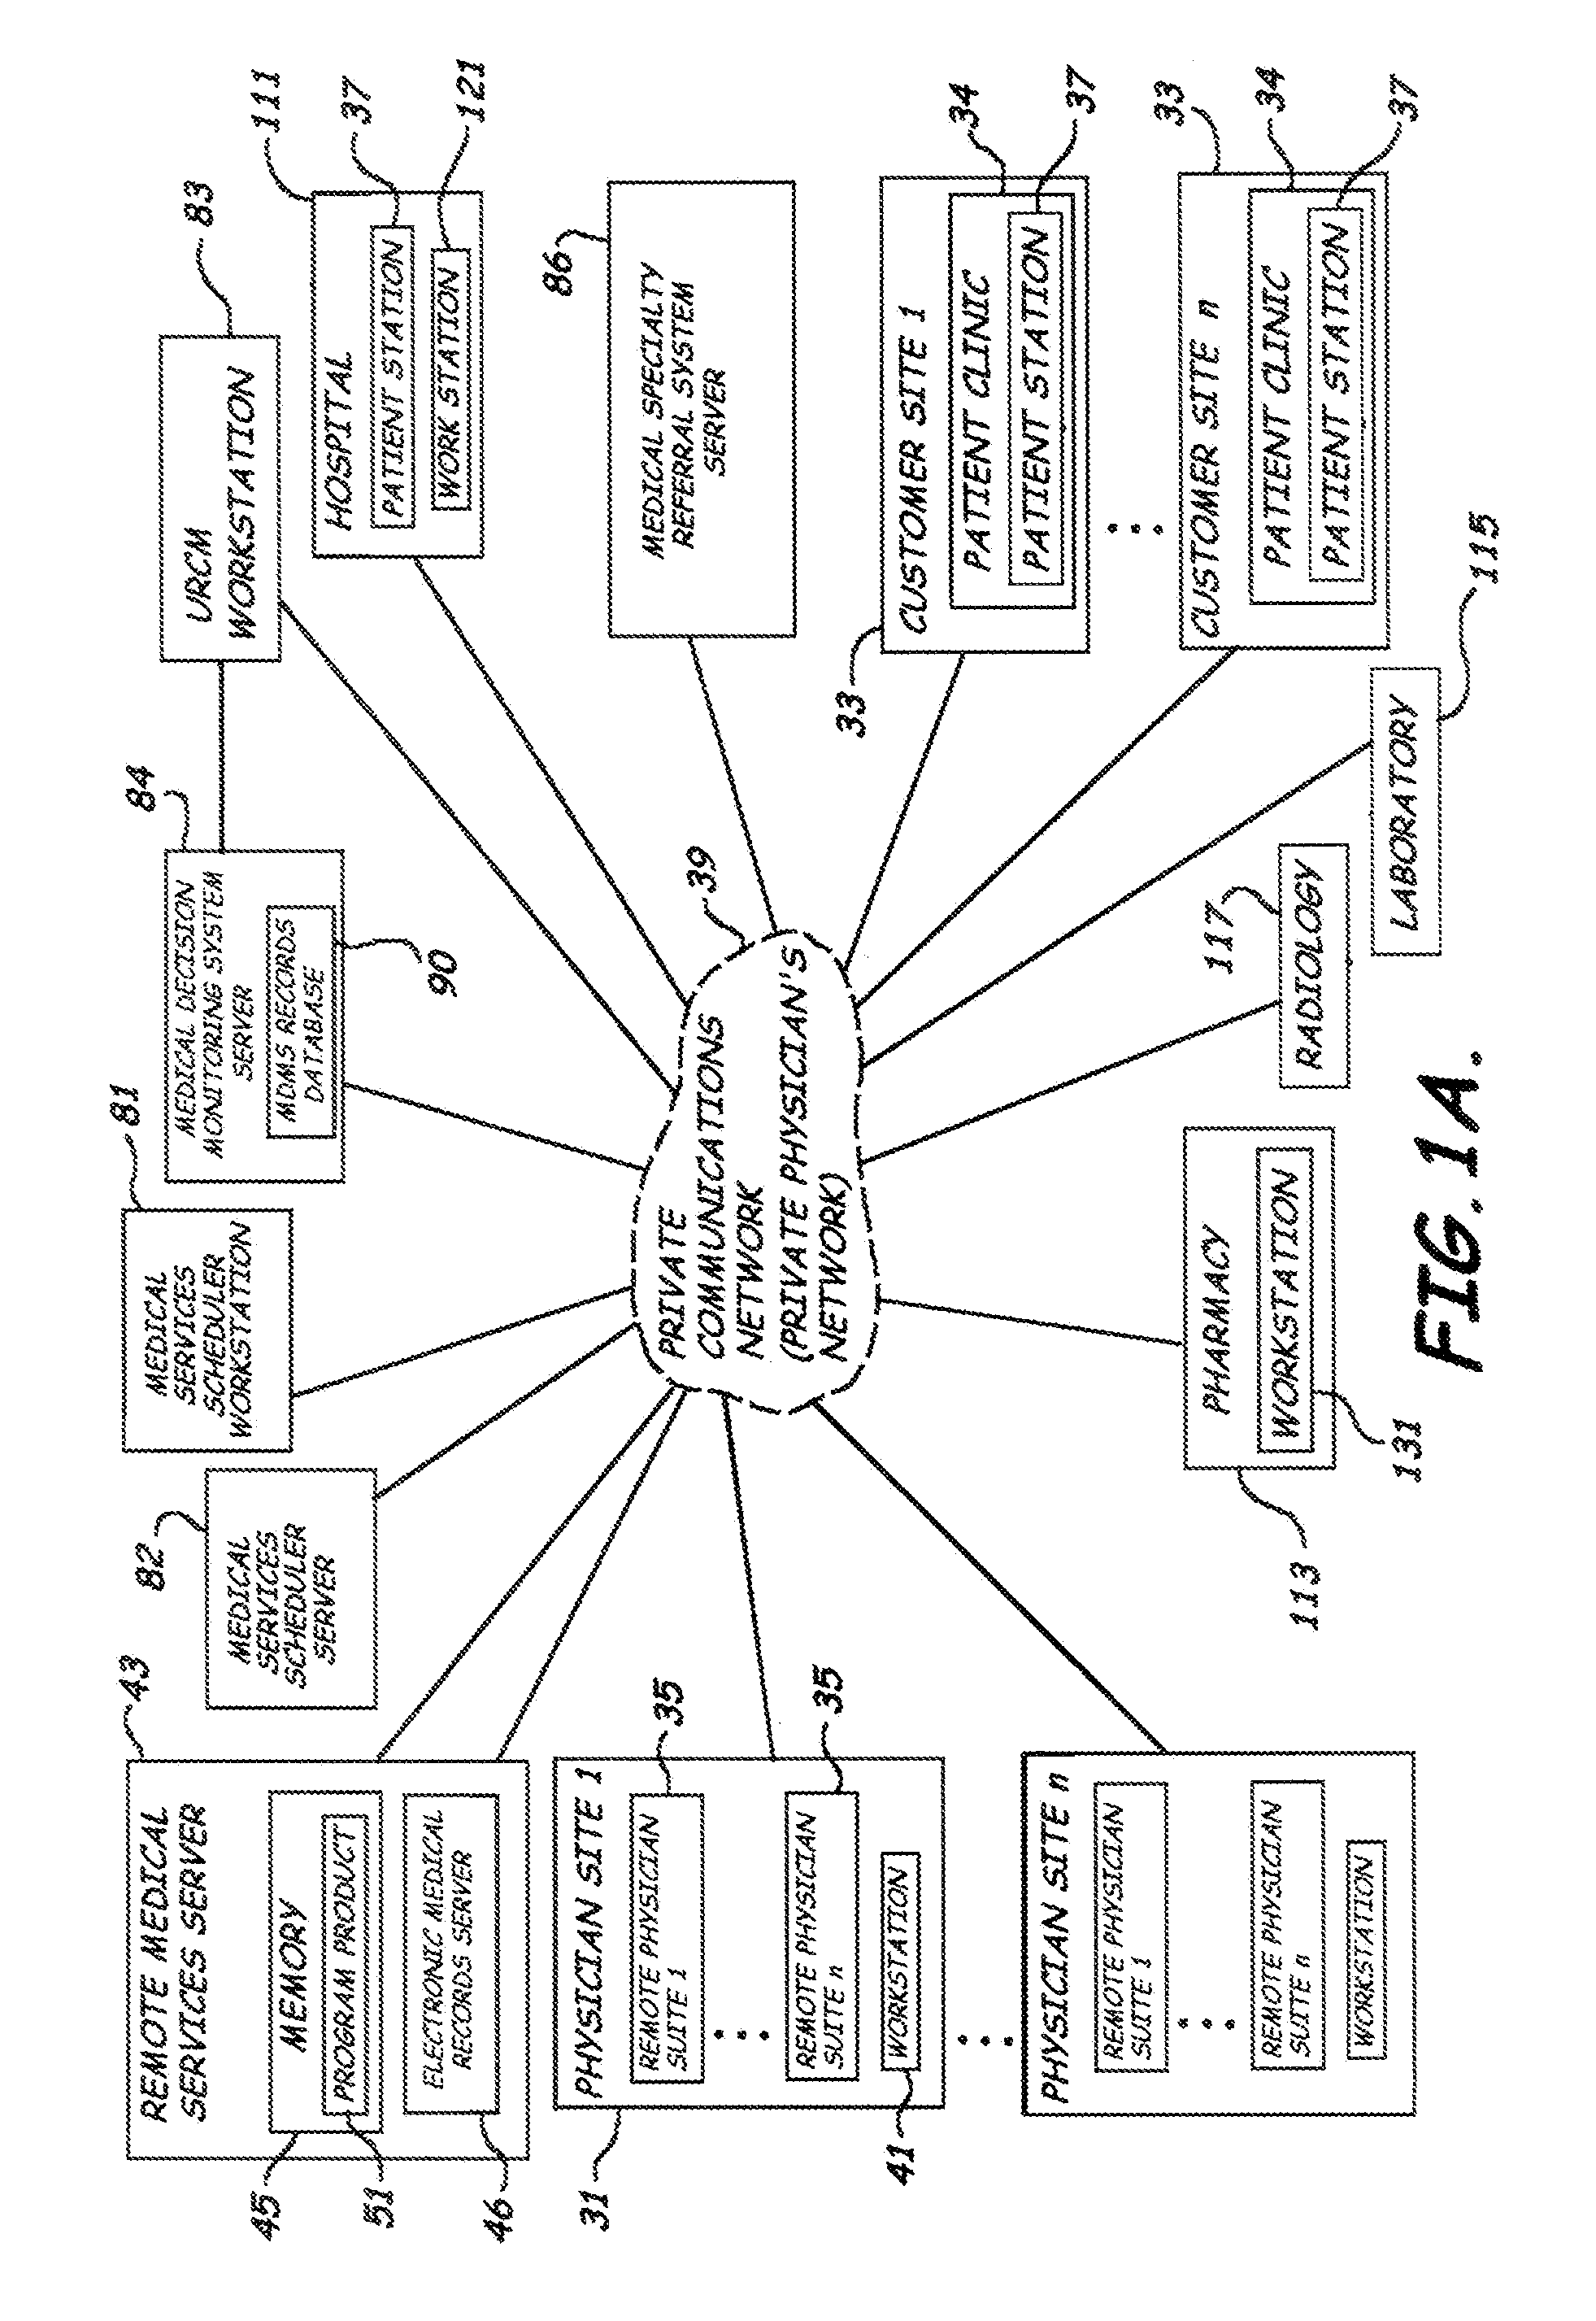 System, method, and program product for delivering medical services from a remote location